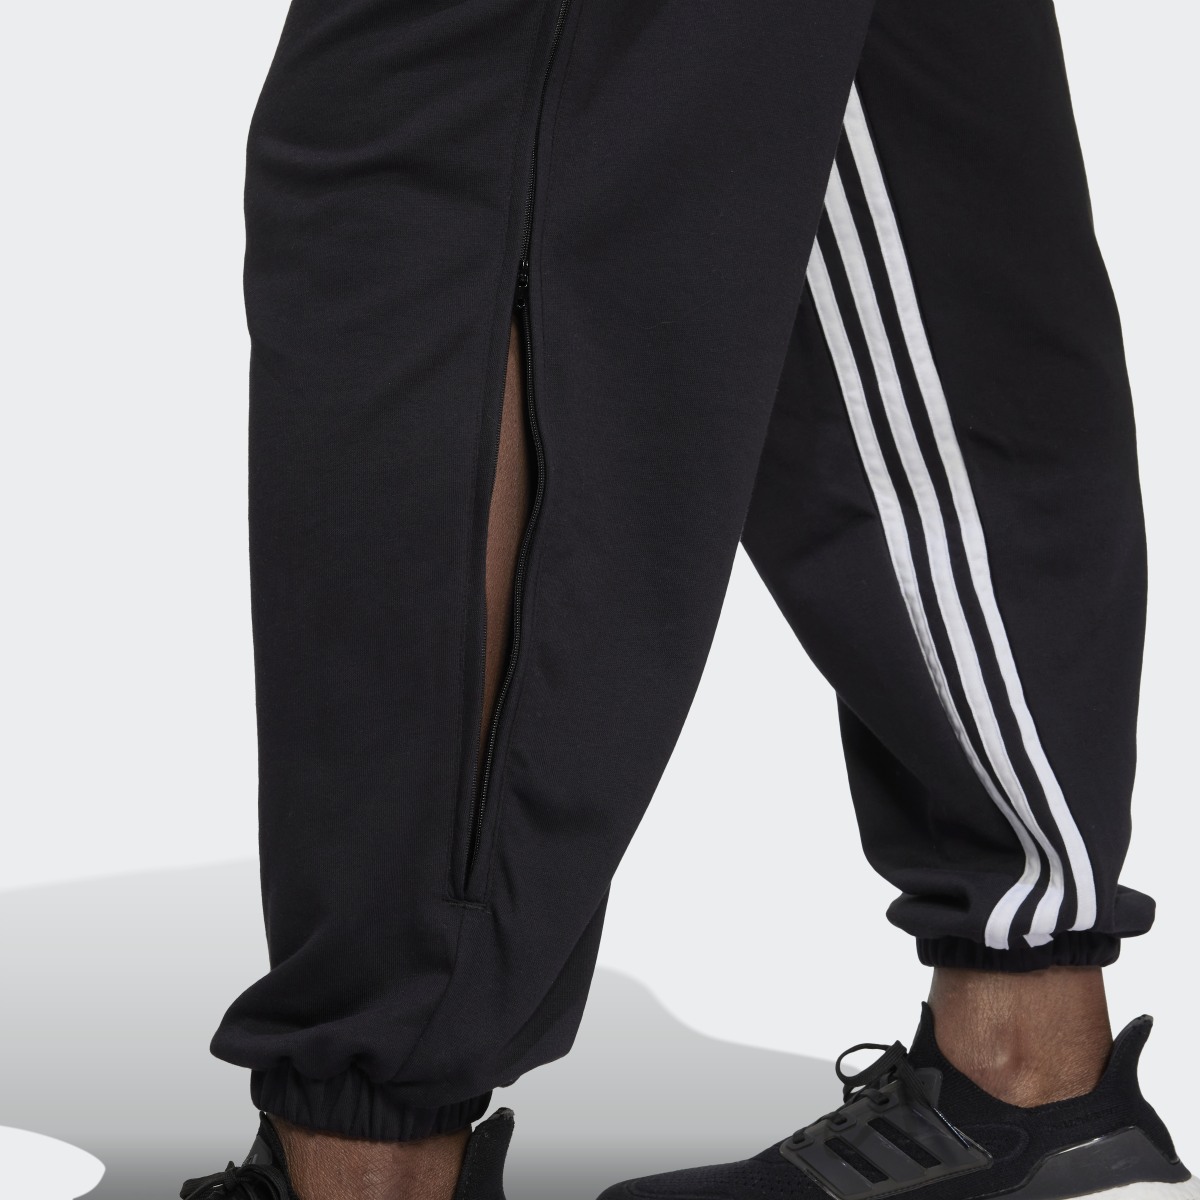 Adidas Hyperglam 3-Stripes Oversized Cuffed Joggers with Side Zippers. 5